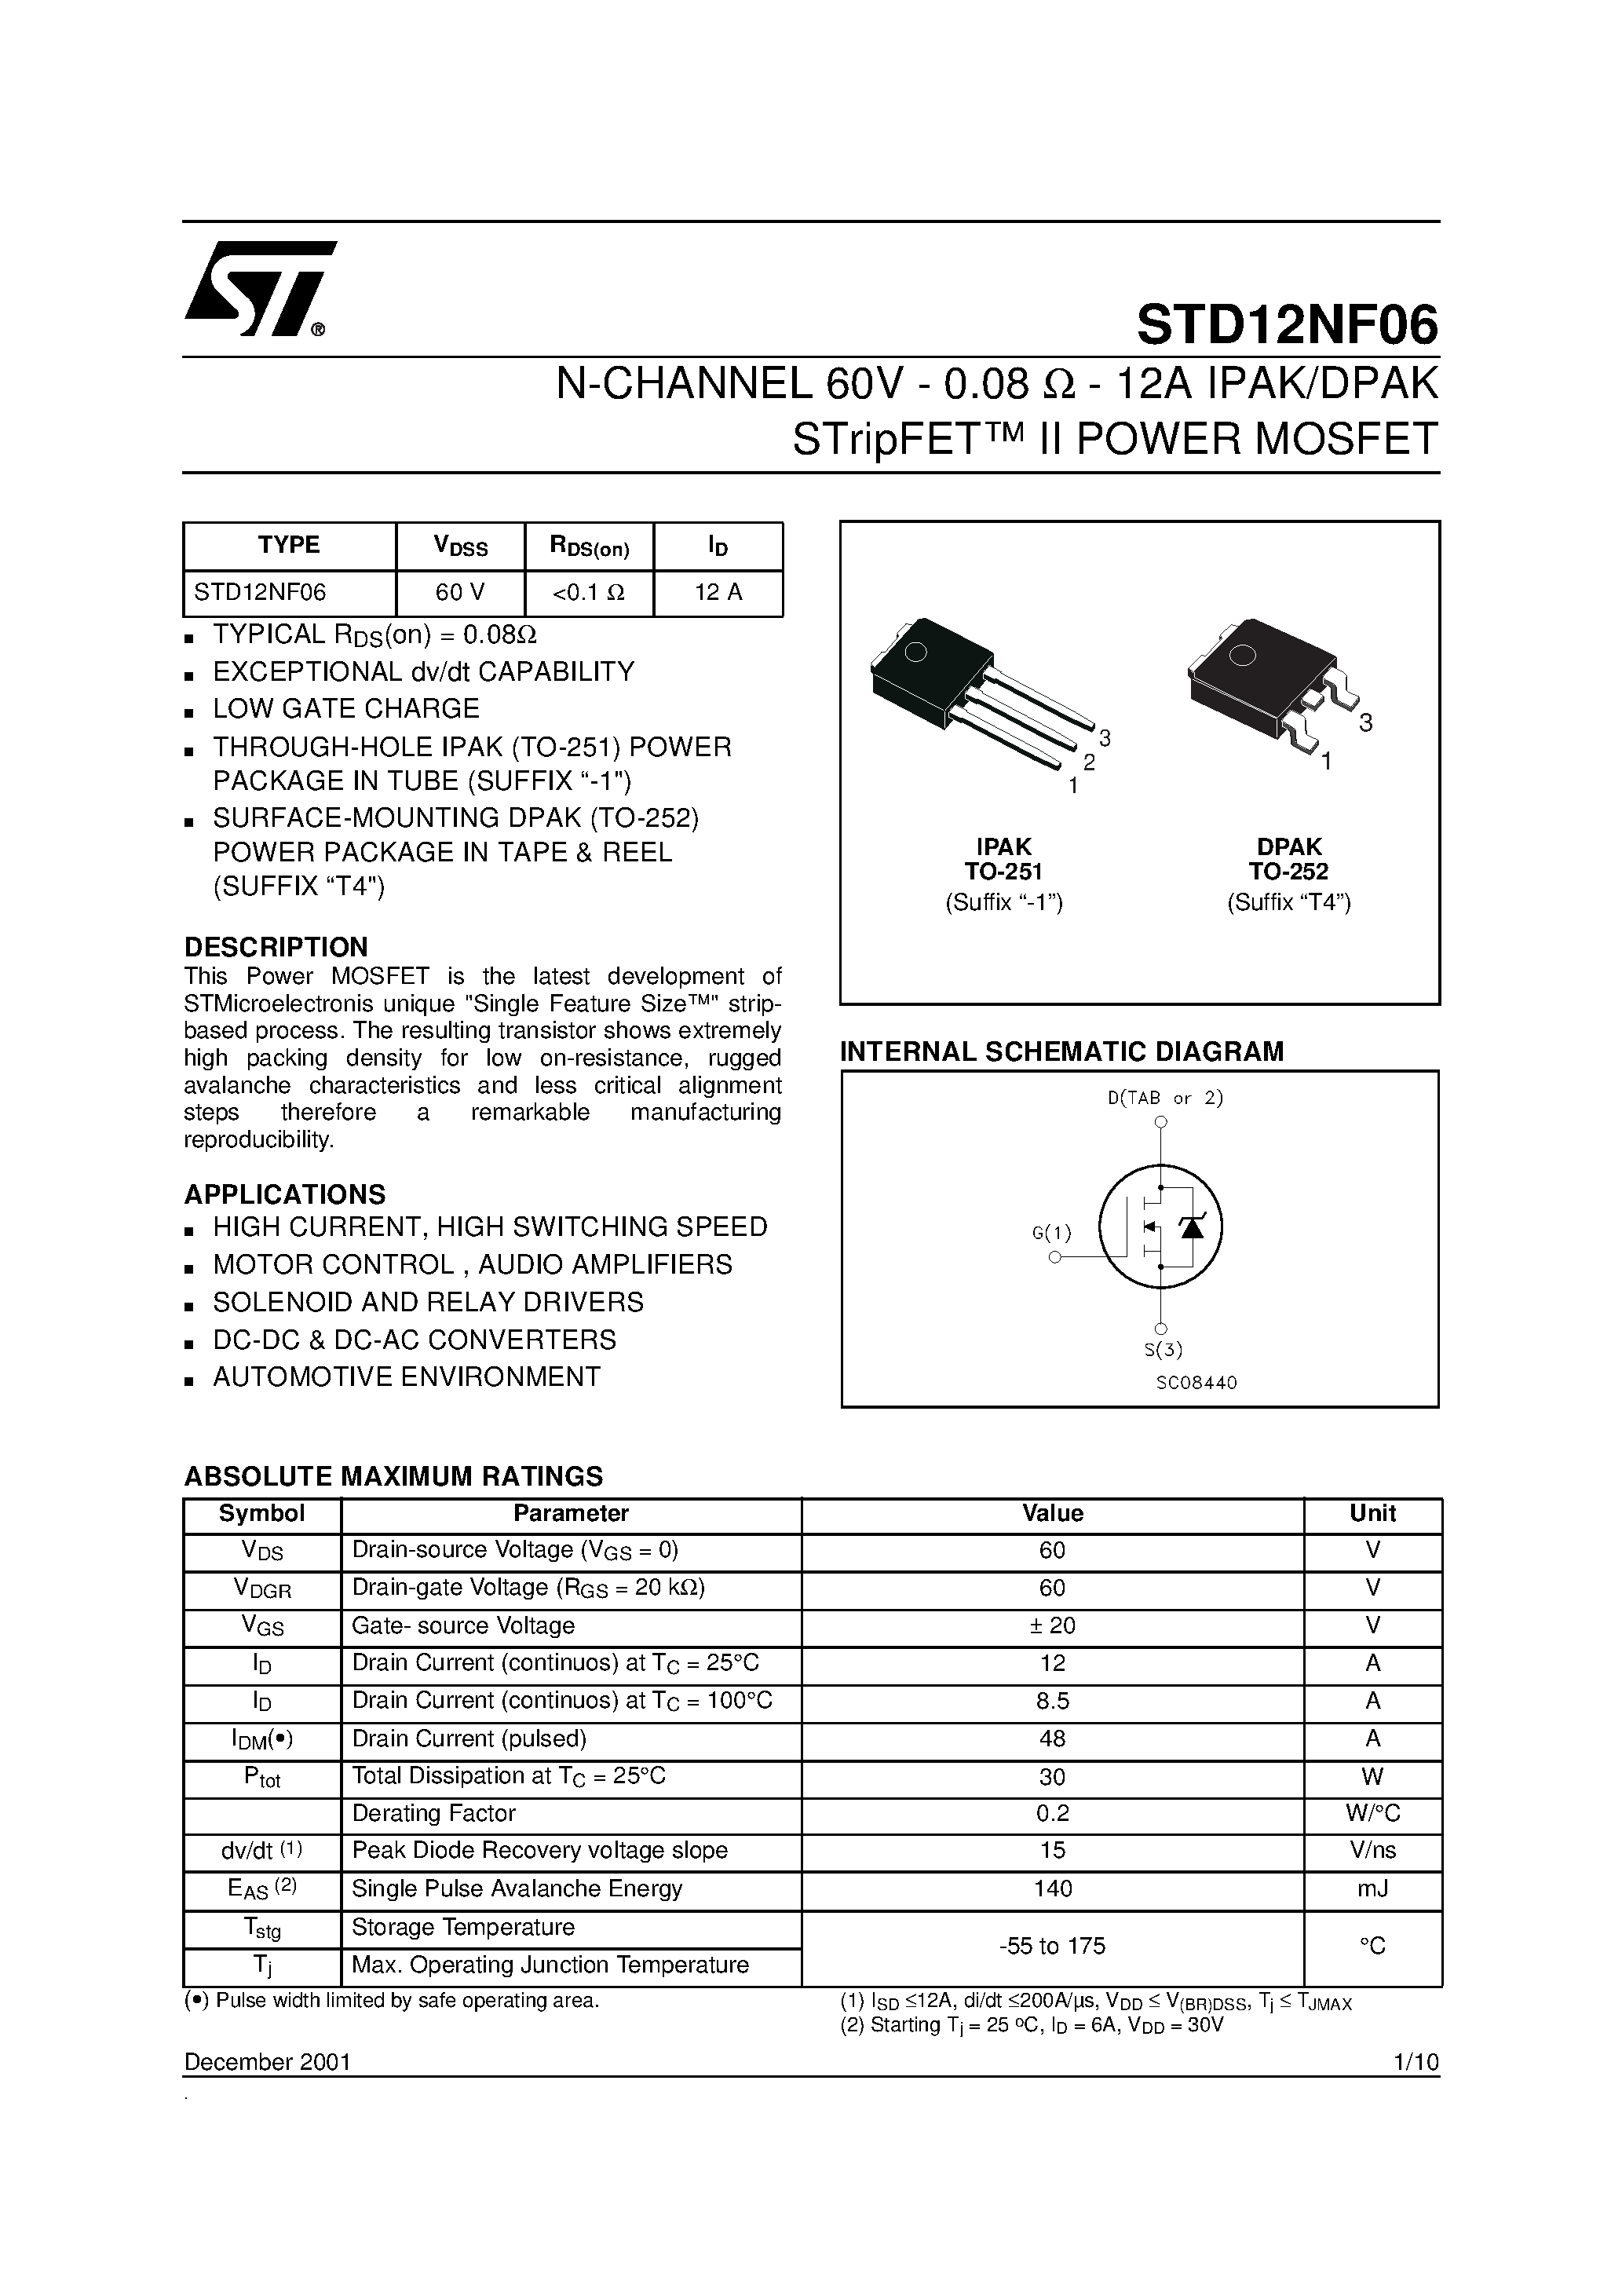 Даташит STD12NF06 - N-CHANNEL POWER MOSFET страница 1